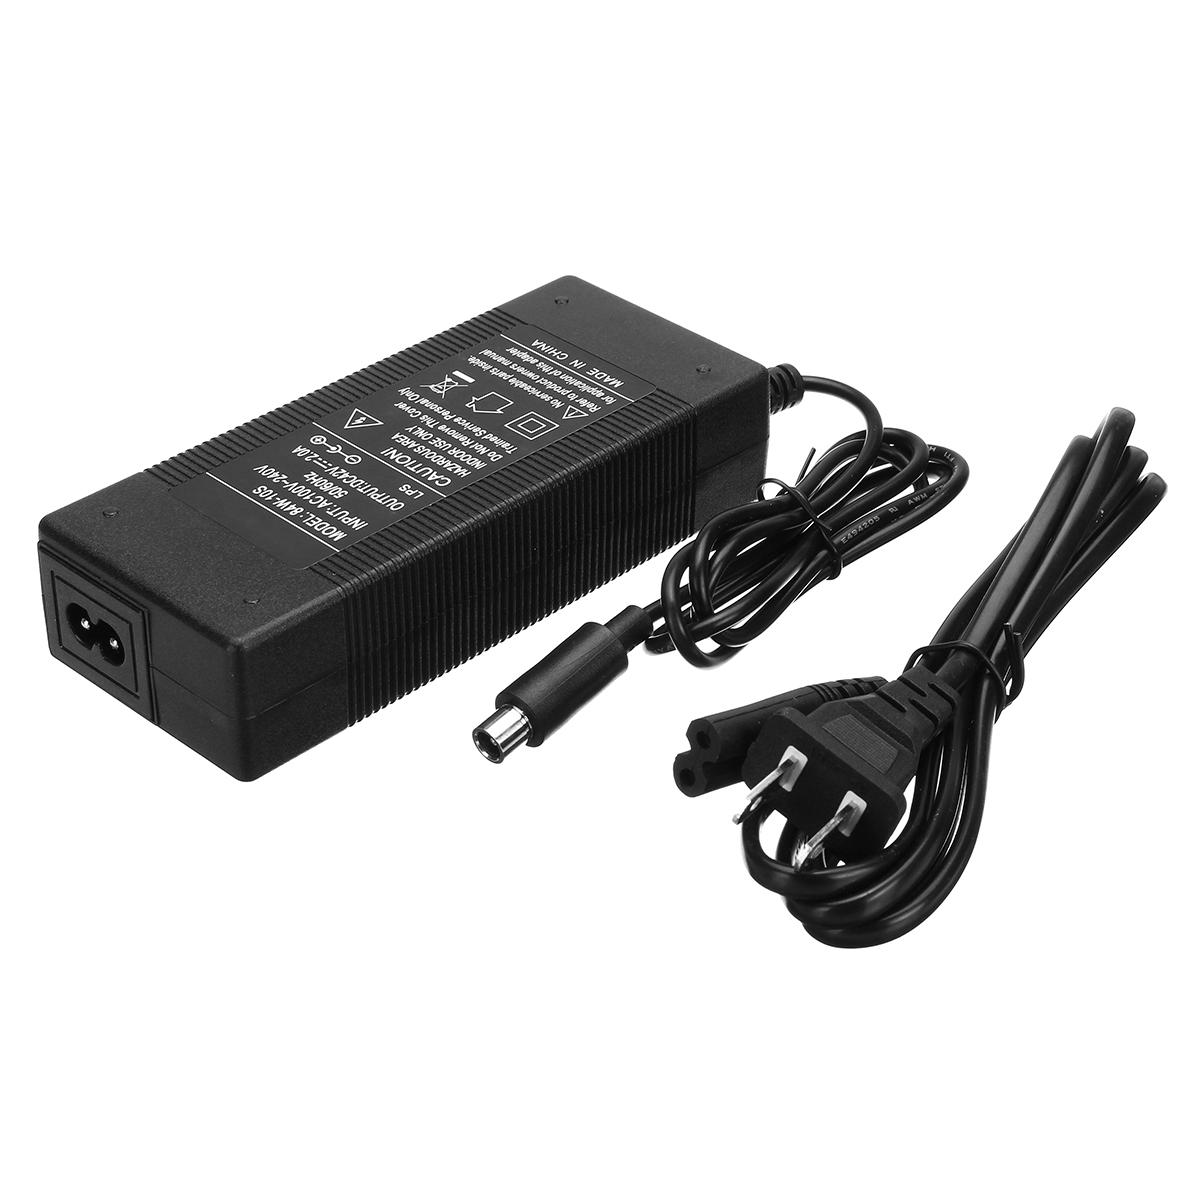 DC42V 1.7A Lithium Battery Charger Battery Equipment for Scooter For Ninebot Scooter